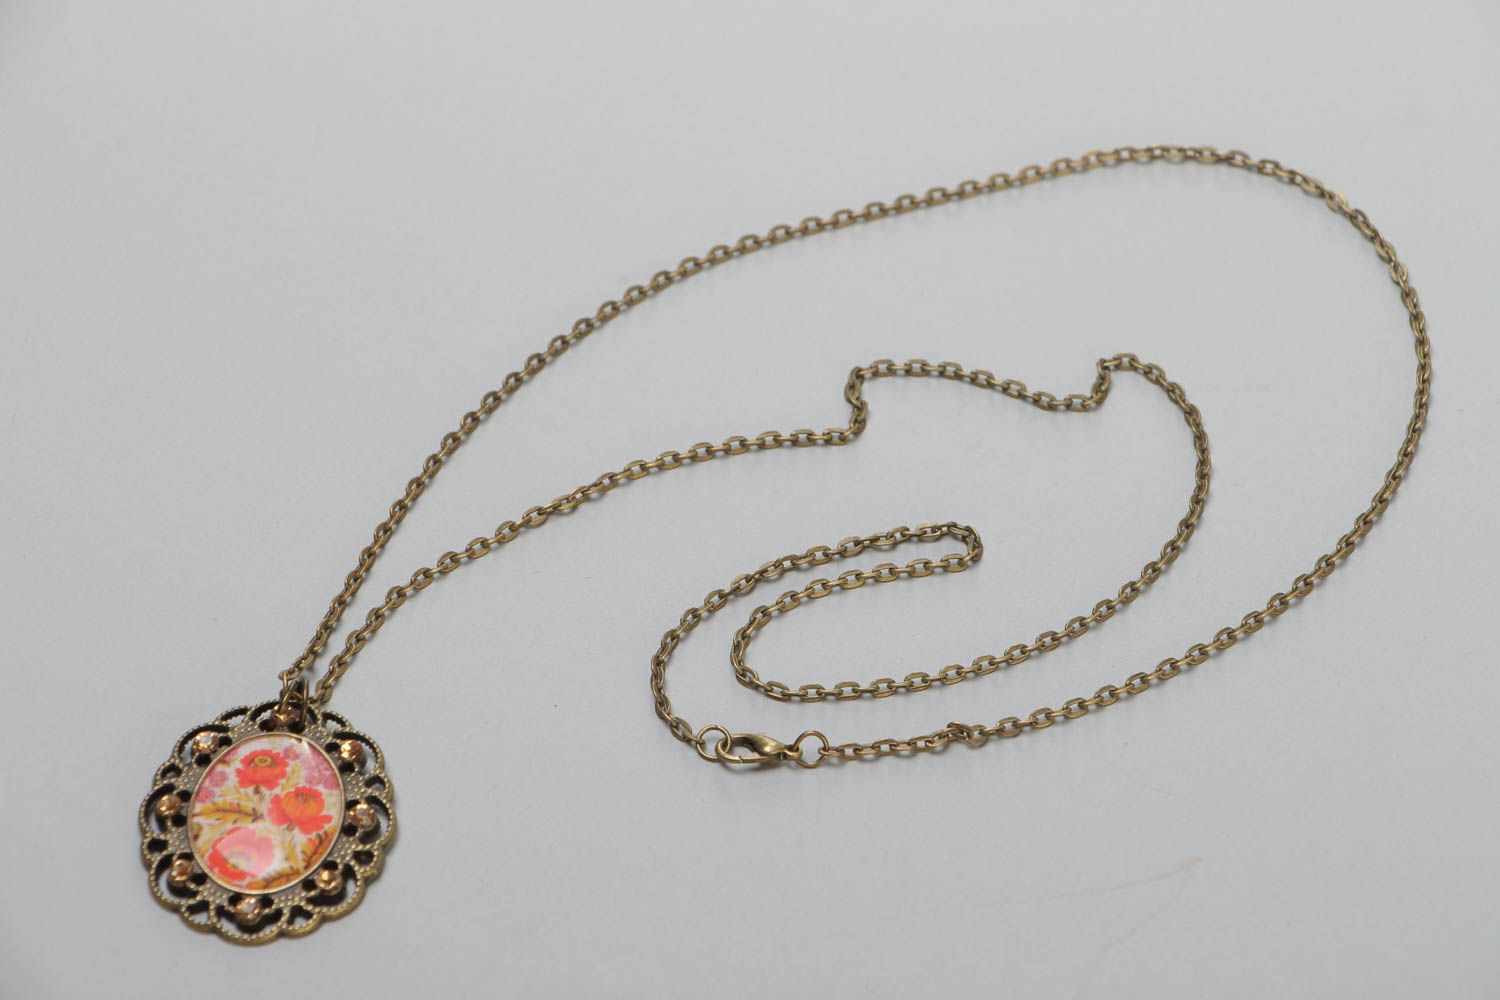 Handmade vintage metal pendant with floral image and glass glaze on chain 700 mm photo 2